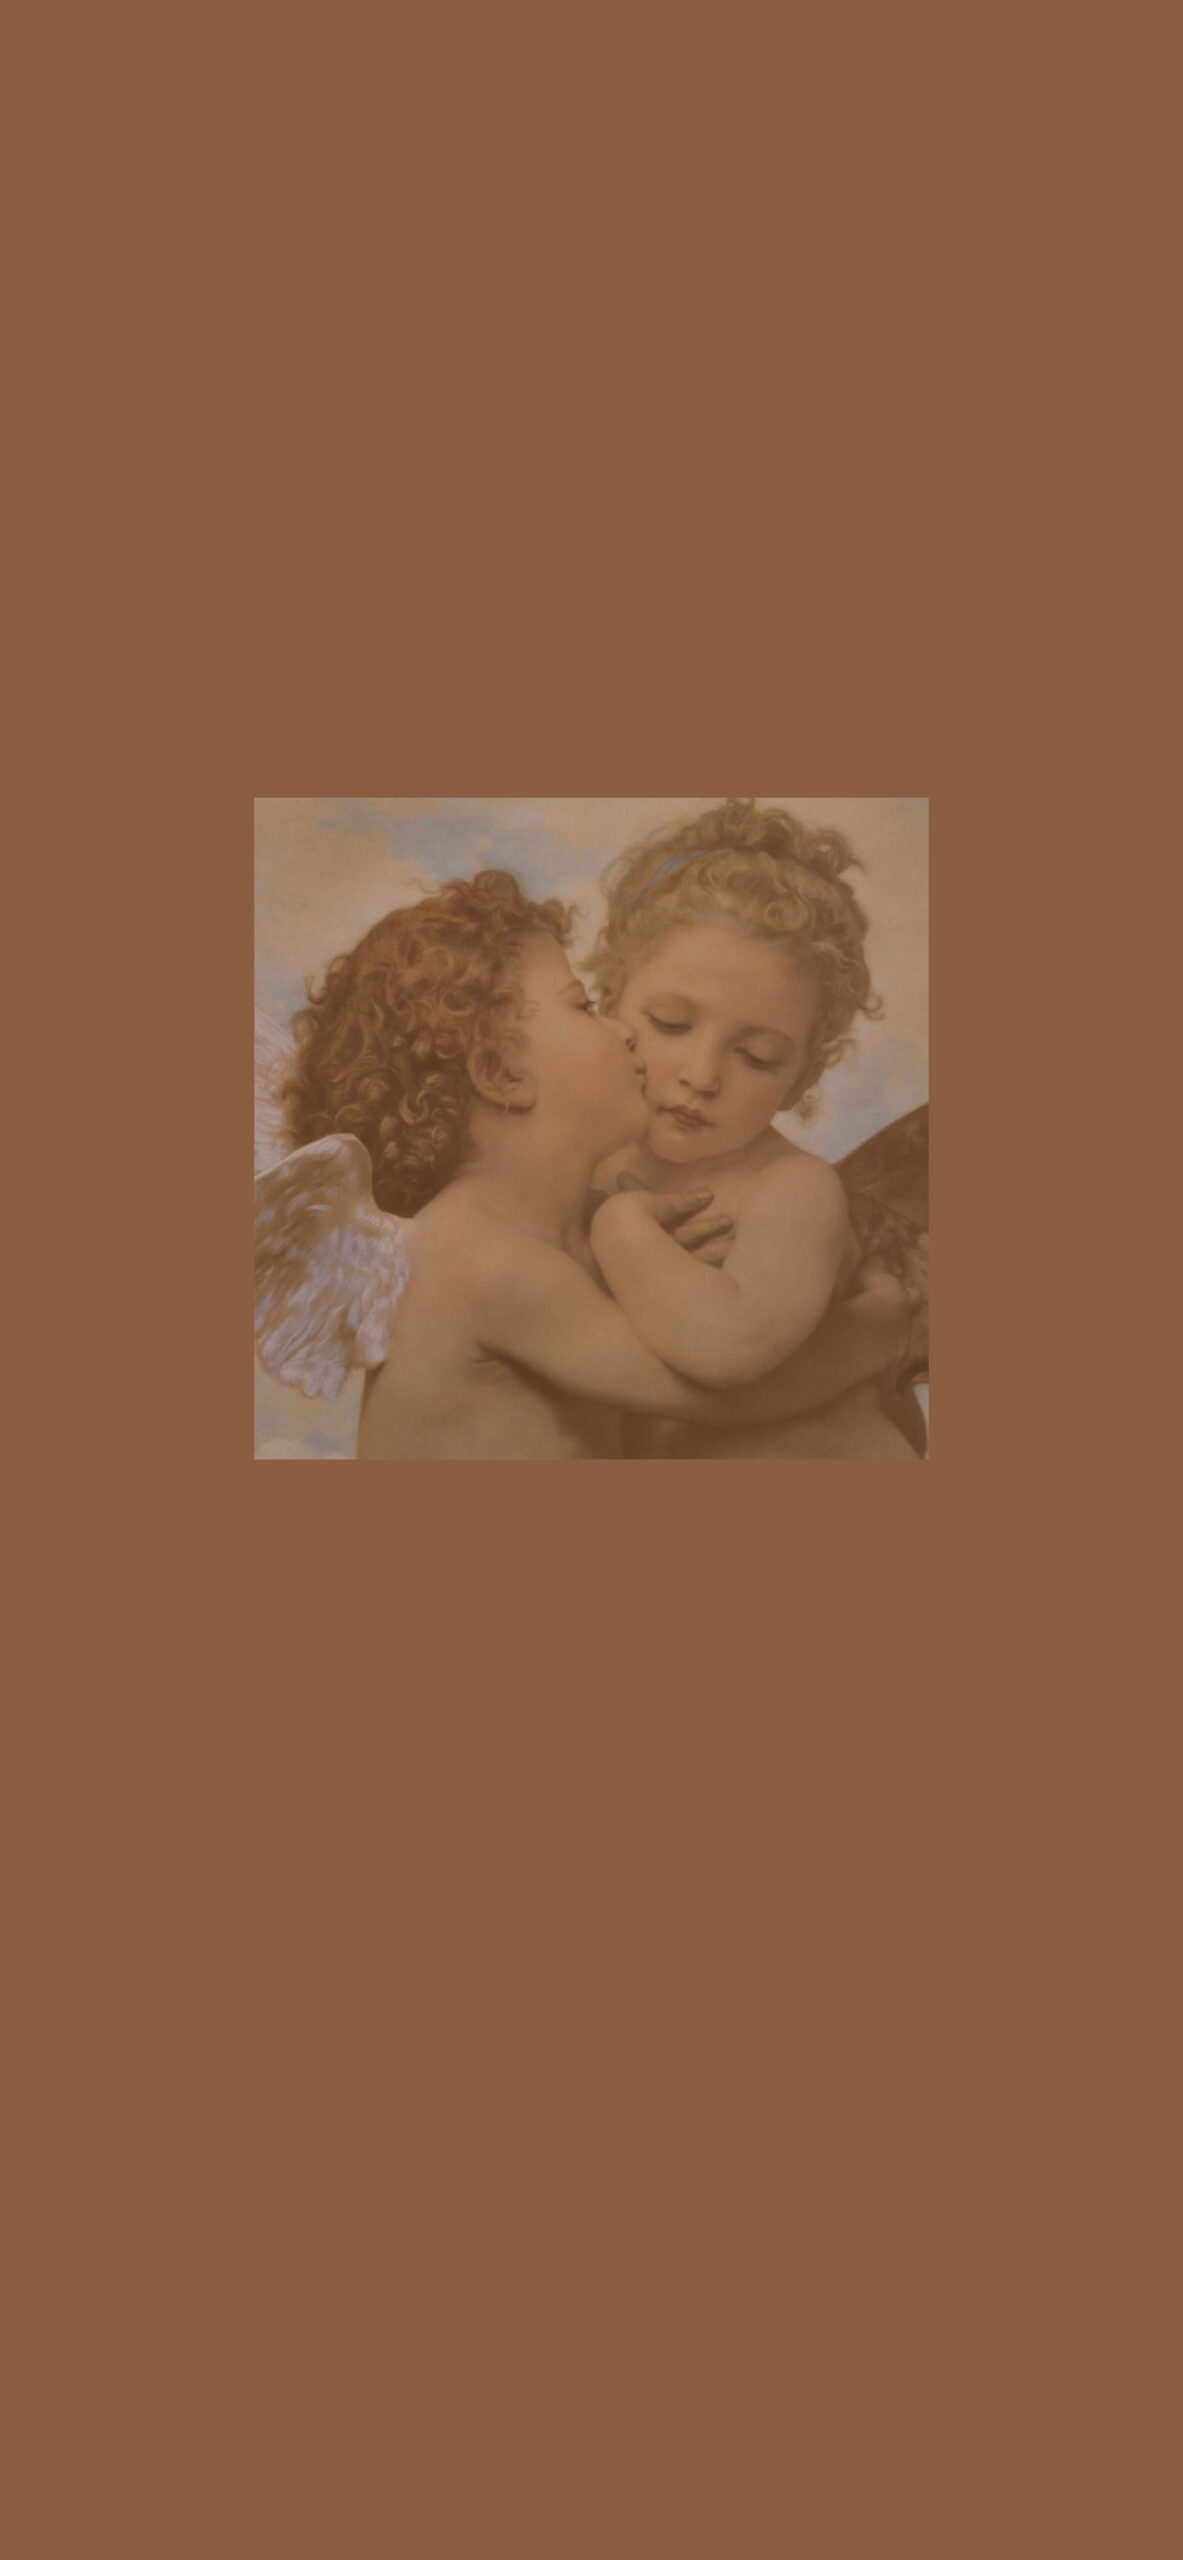 kissing angels brown background